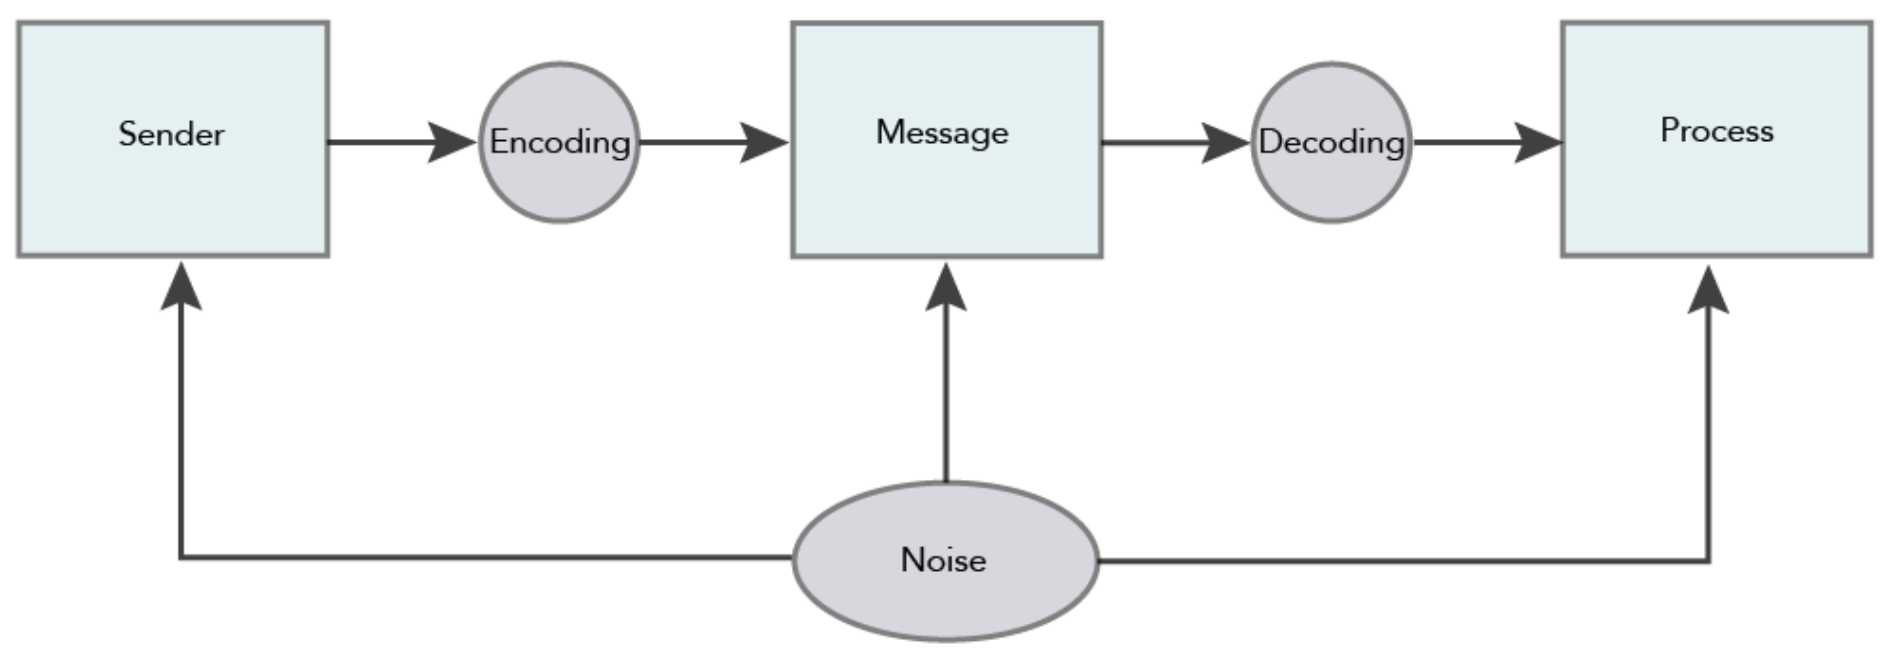 A flowchart of the social communication model, this time with "noise" being added to the sender, message, and process steps.